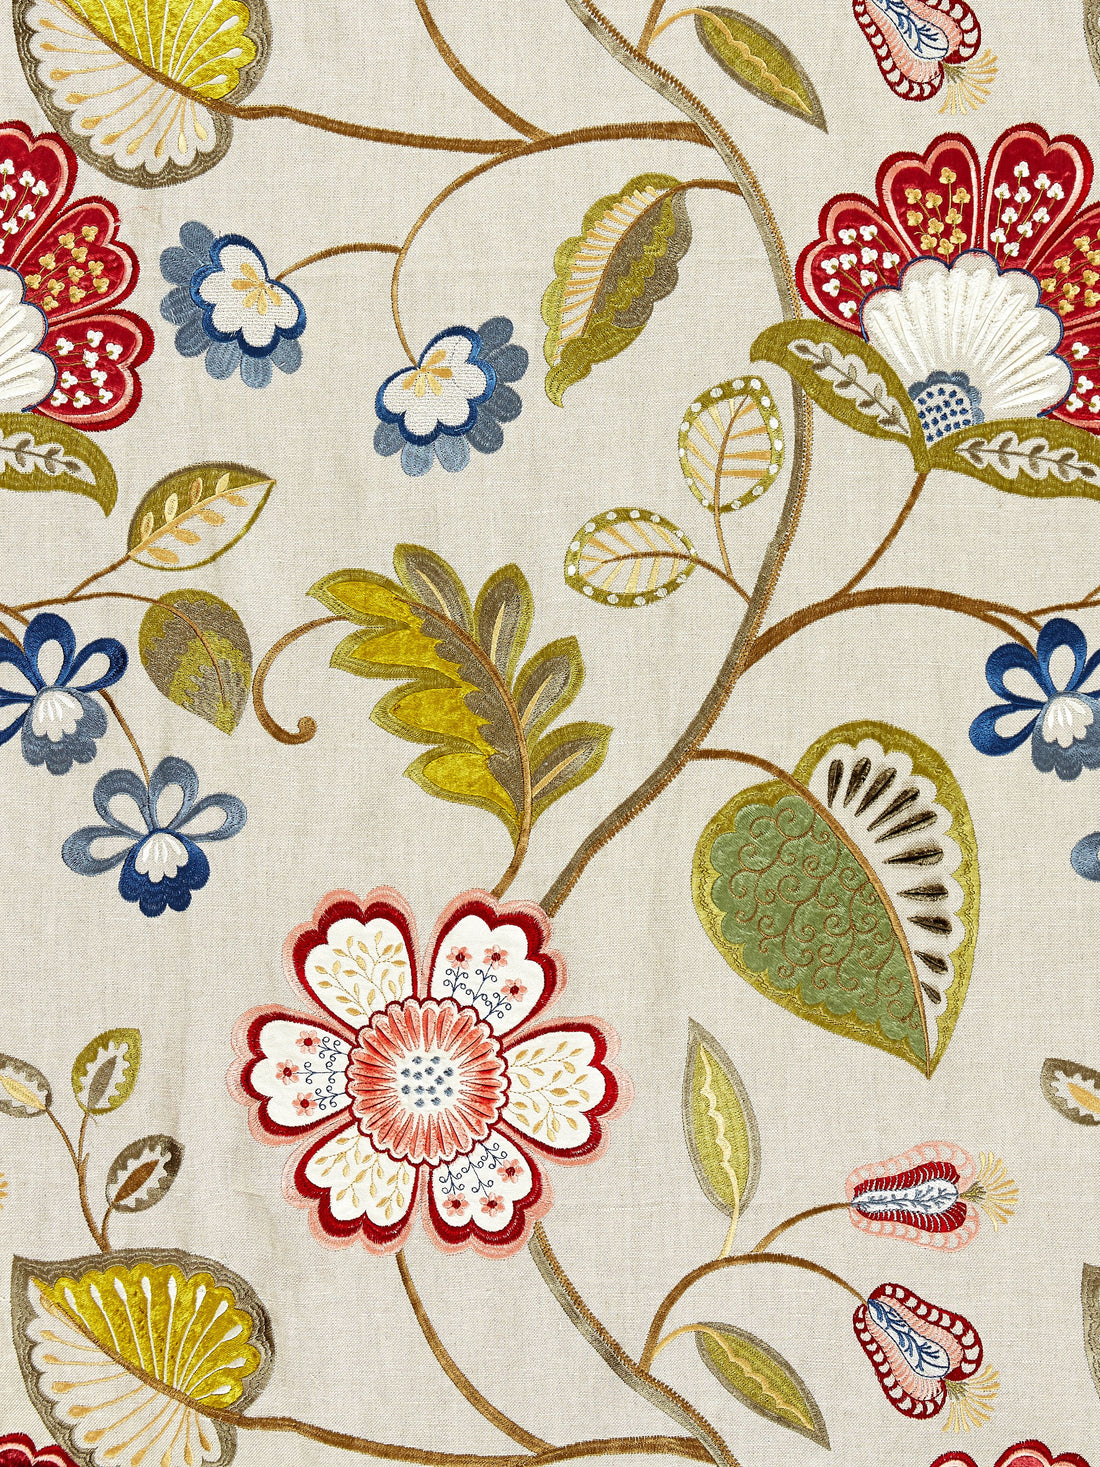 Willowood Embroidery fabric in bloom color - pattern number SC 000227071 - by Scalamandre in the Scalamandre Fabrics Book 1 collection